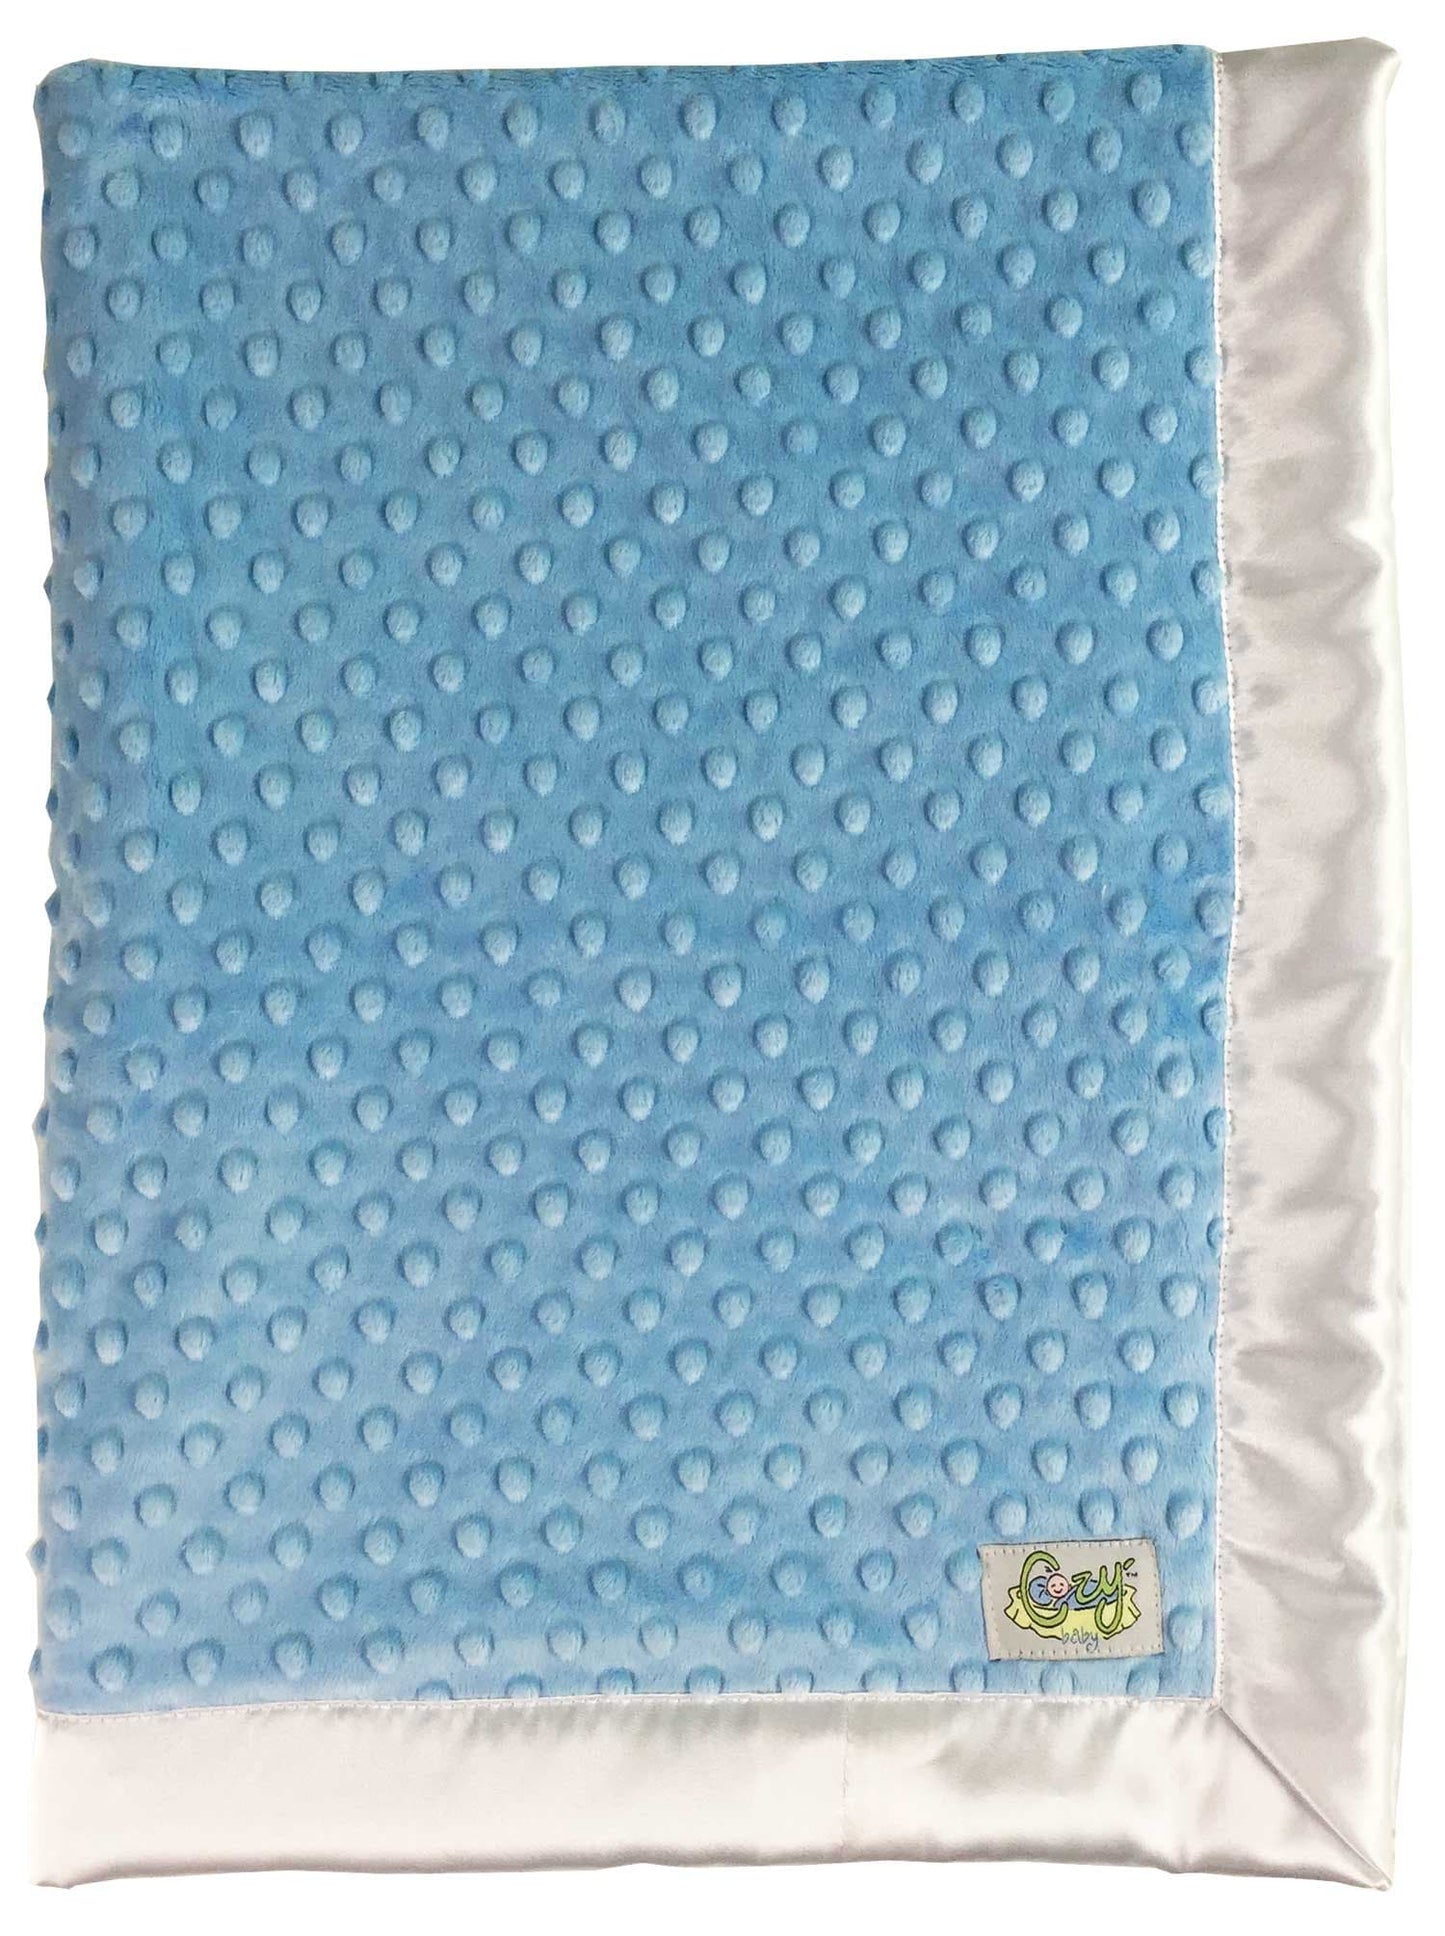 Minky Dot Baby Blanket - Choose Color and Size - Lovey, Stroller, Crib